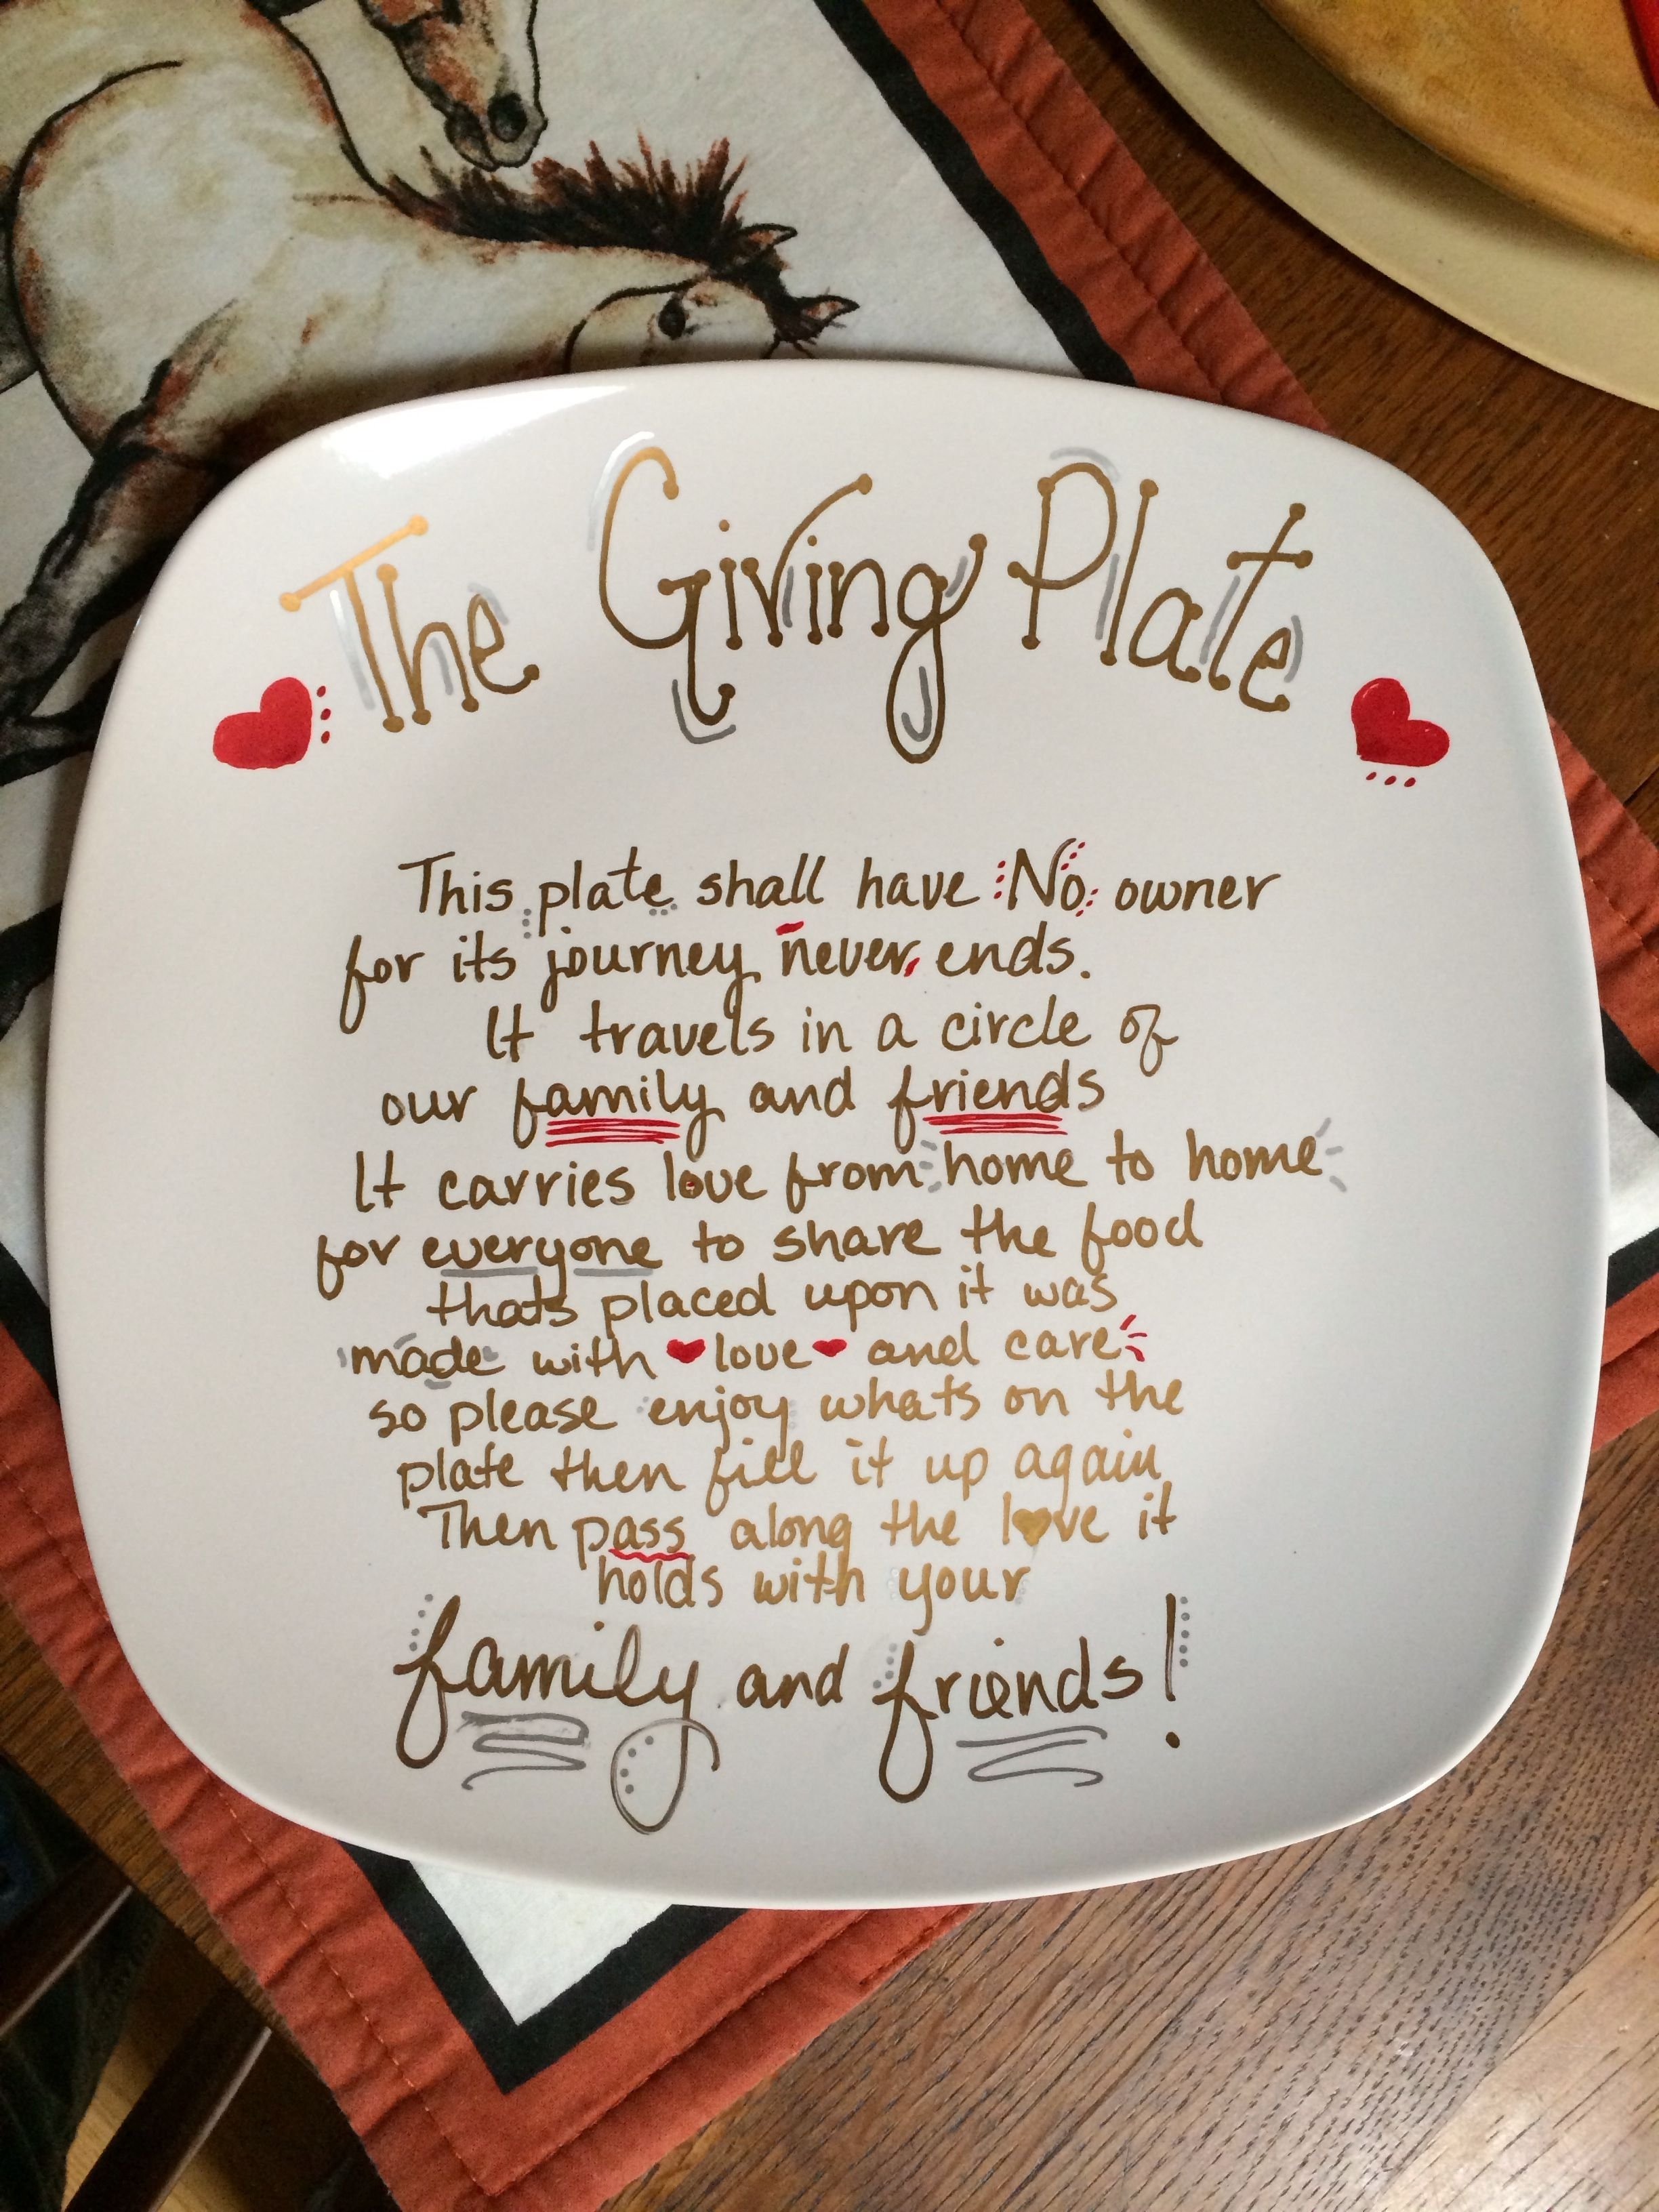 10 Elegant Christmas Gift Ideas For Sister In Law a gift from my sister in law the giving plate bring this dish as a 1 2022